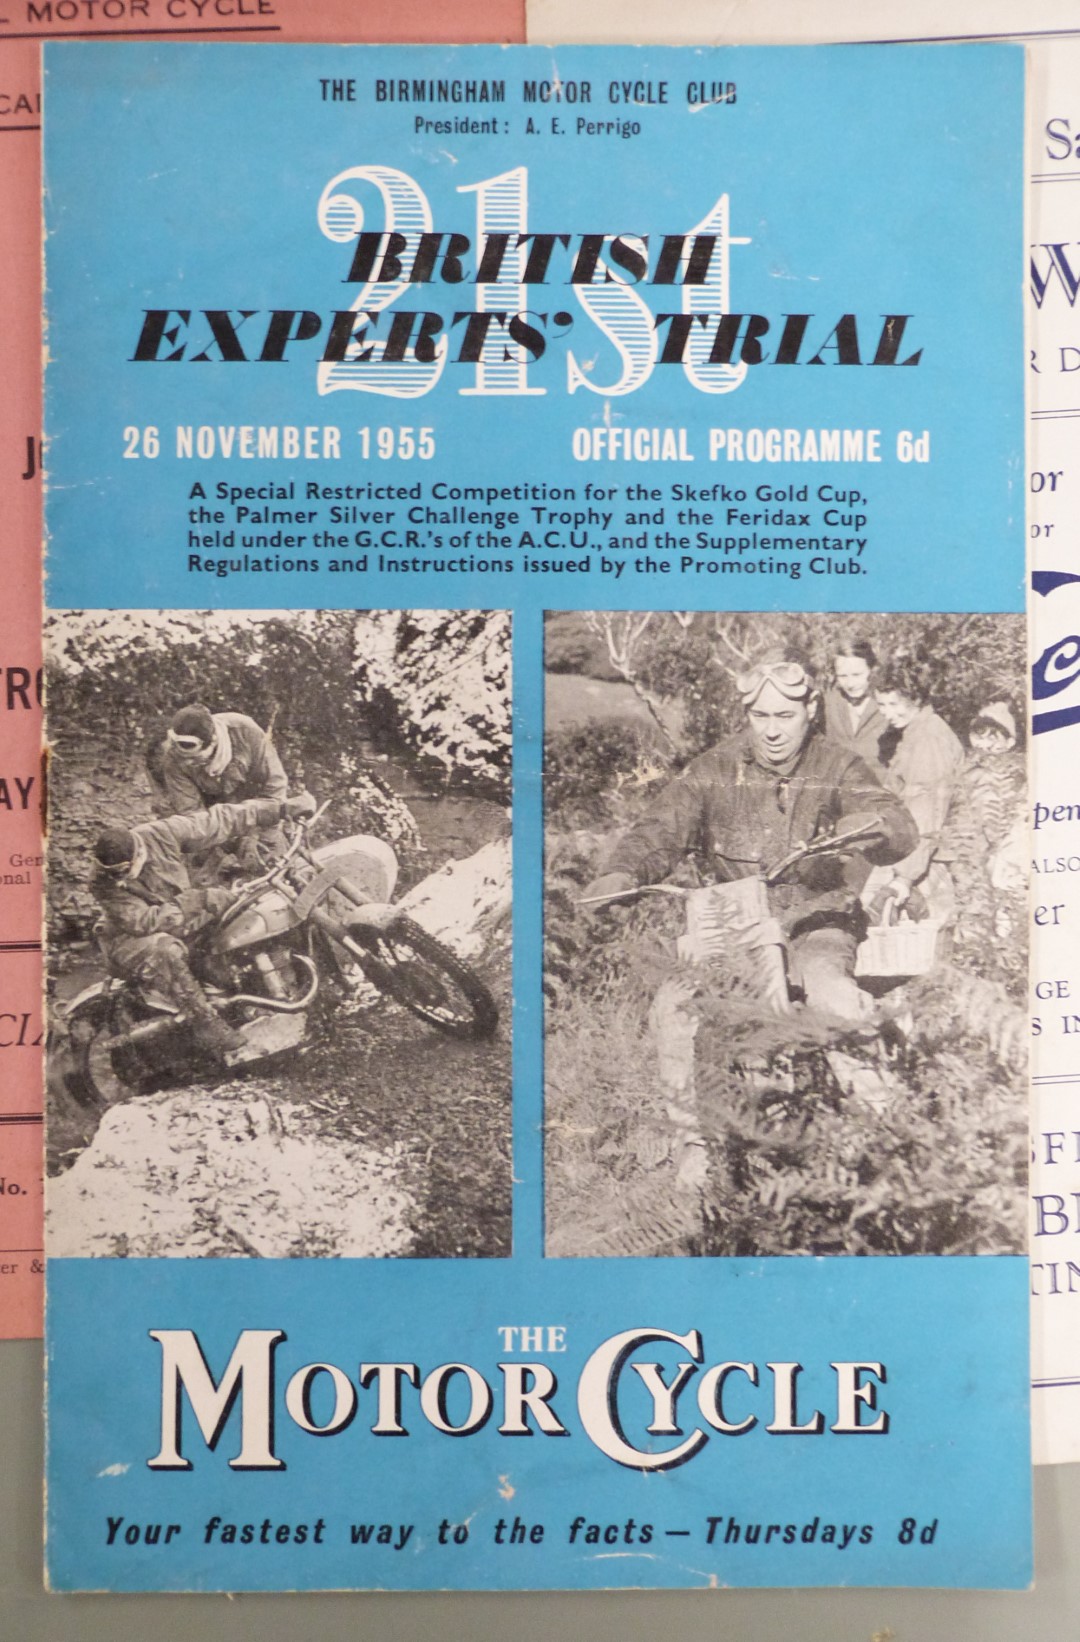 Stroud interest motorcycle trial ephemera and medals relating to R.W. Sutton, including silver - Image 3 of 4